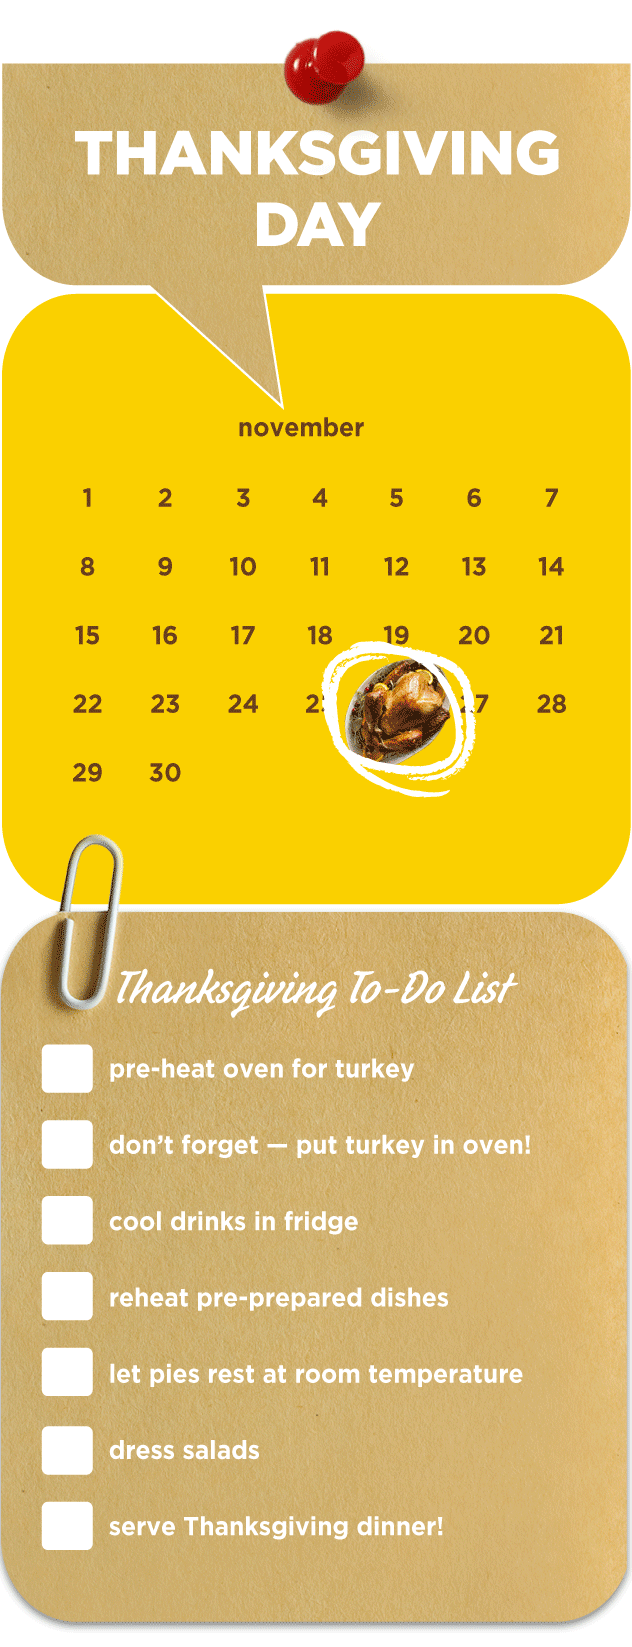 Thanksgiving-Day_Thanksgiving-Checklist_PAM_2015.png